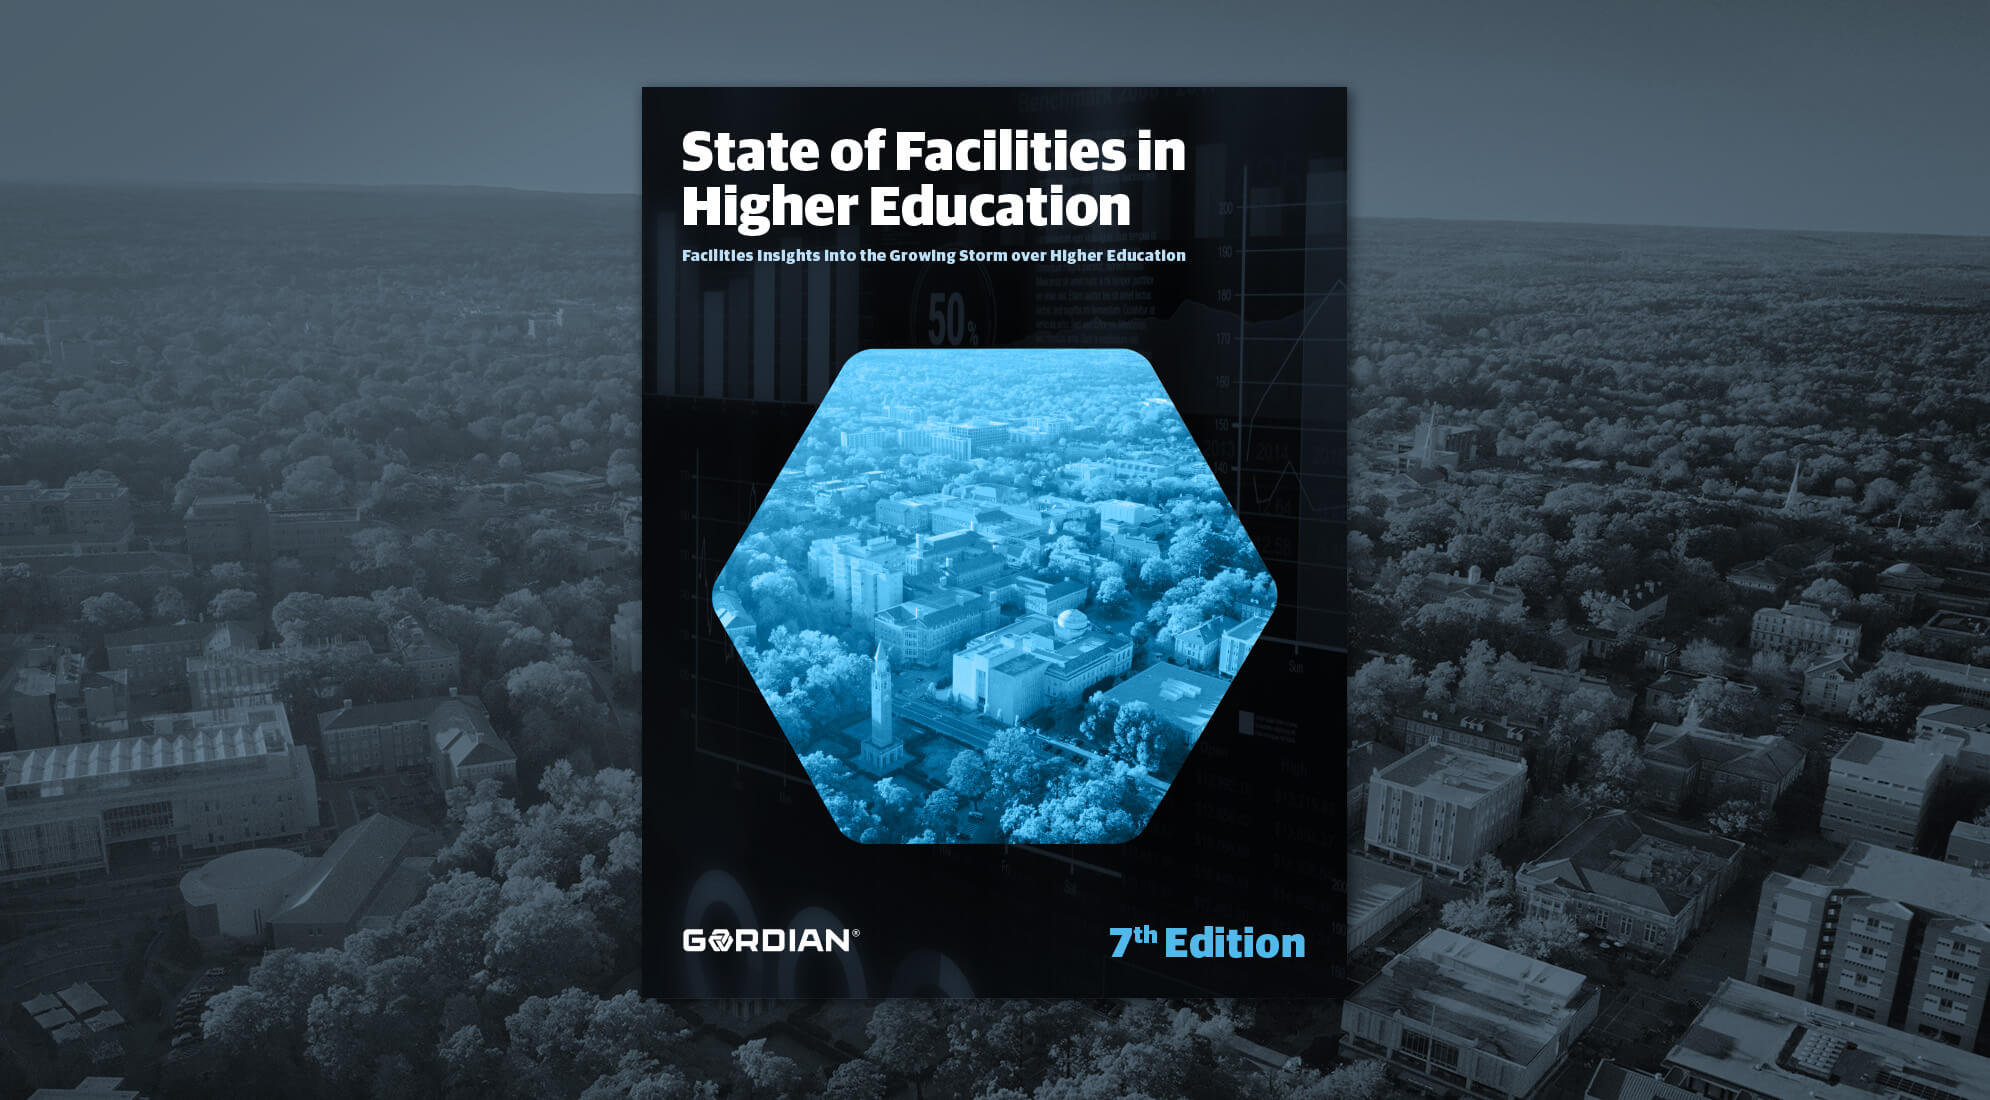 The State of Facilities in Higher Education, 7th Edition